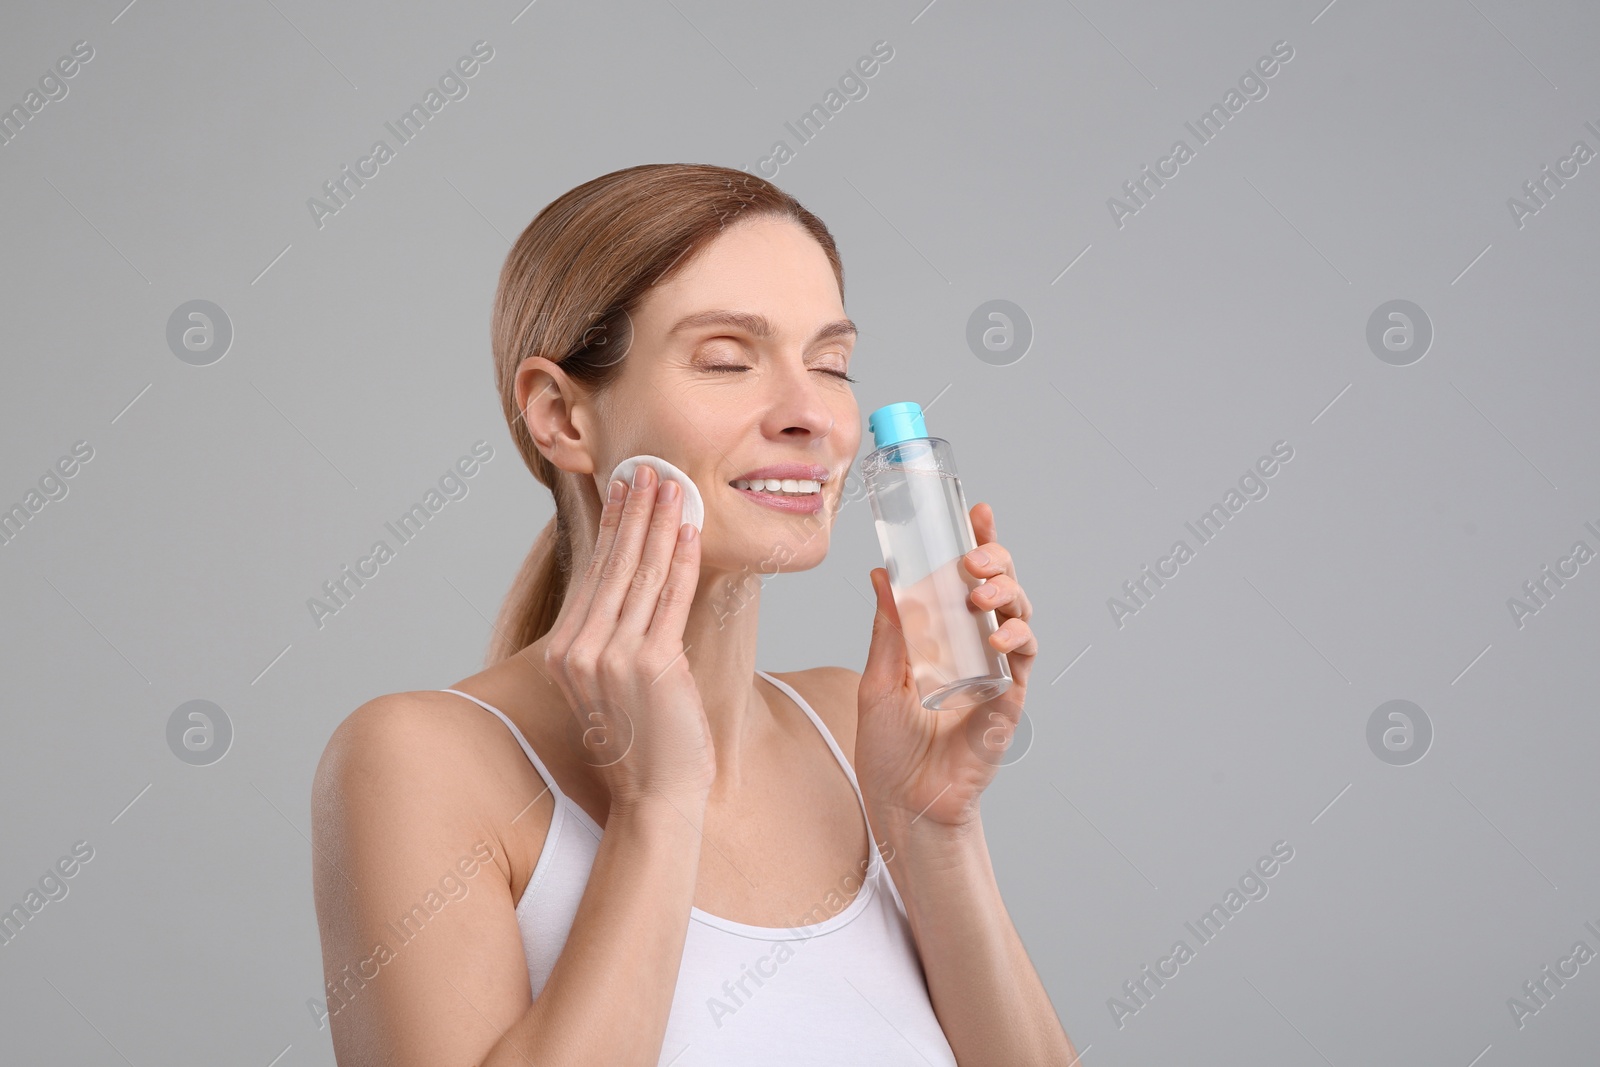 Photo of Beautiful woman removing makeup with cotton pad on gray background, space for text